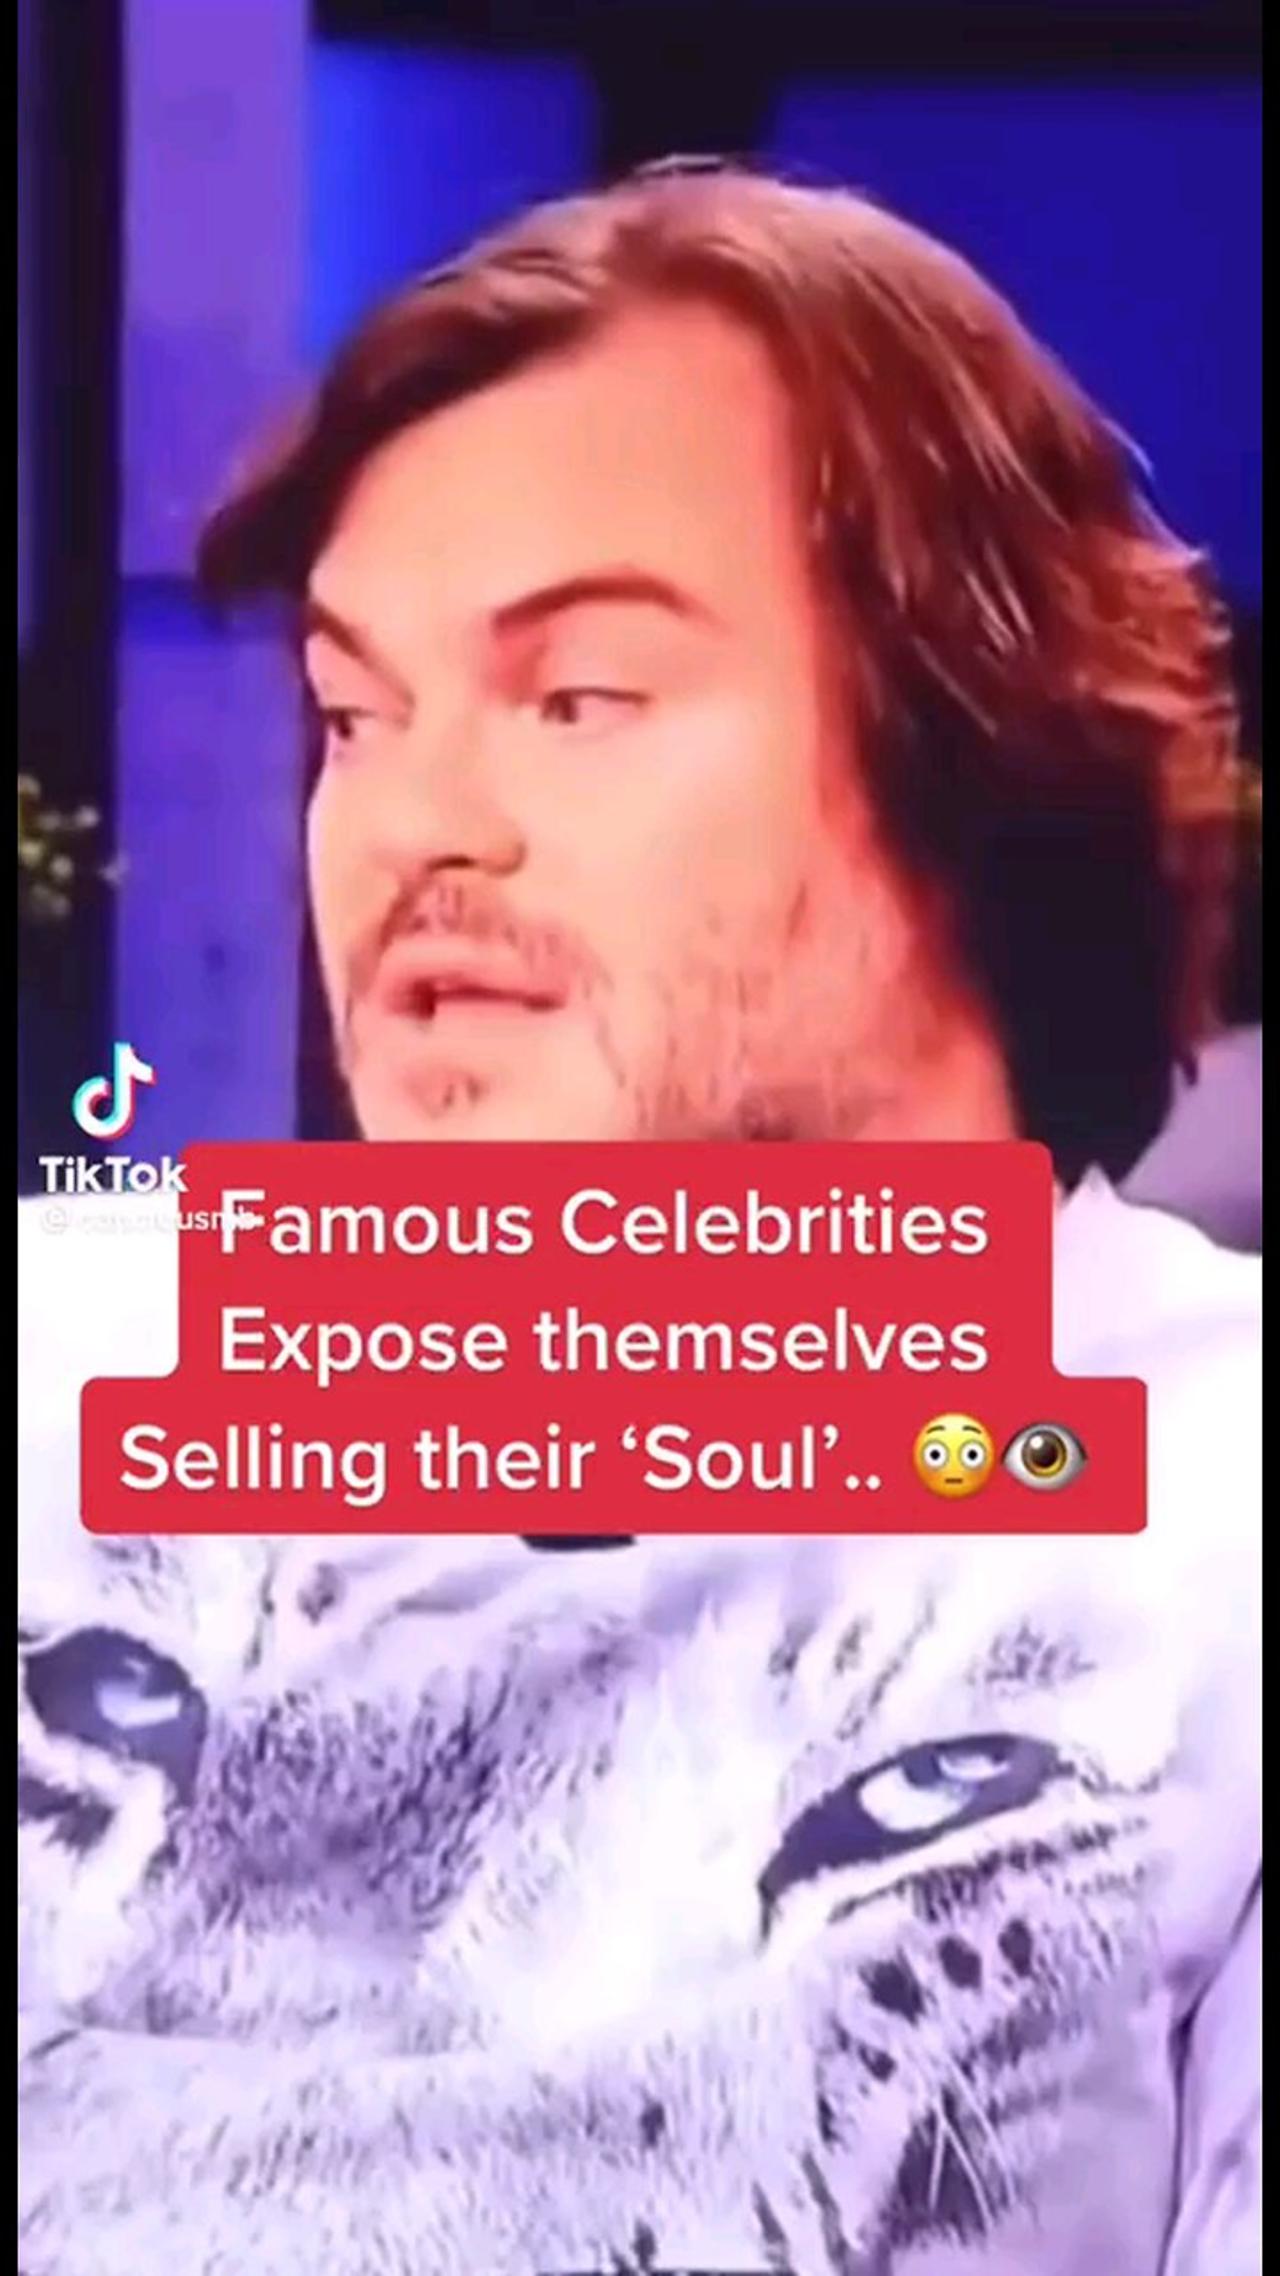 All celebrities sold their soul